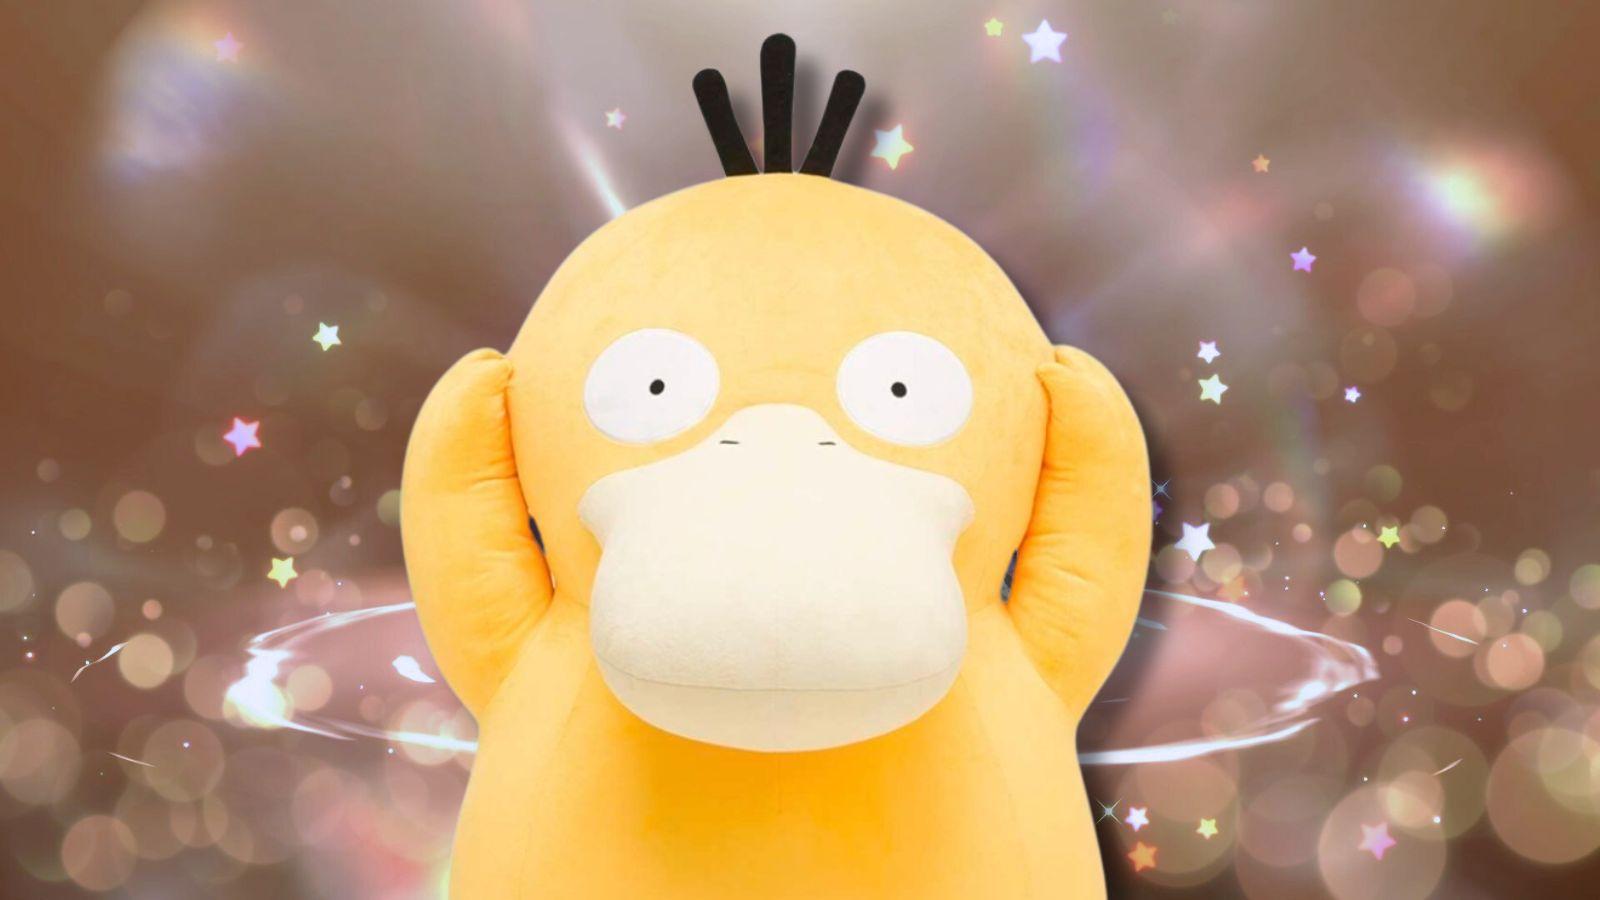 Psyduck plushie with sparkly background from Pokemon Scarlet mystery gift.